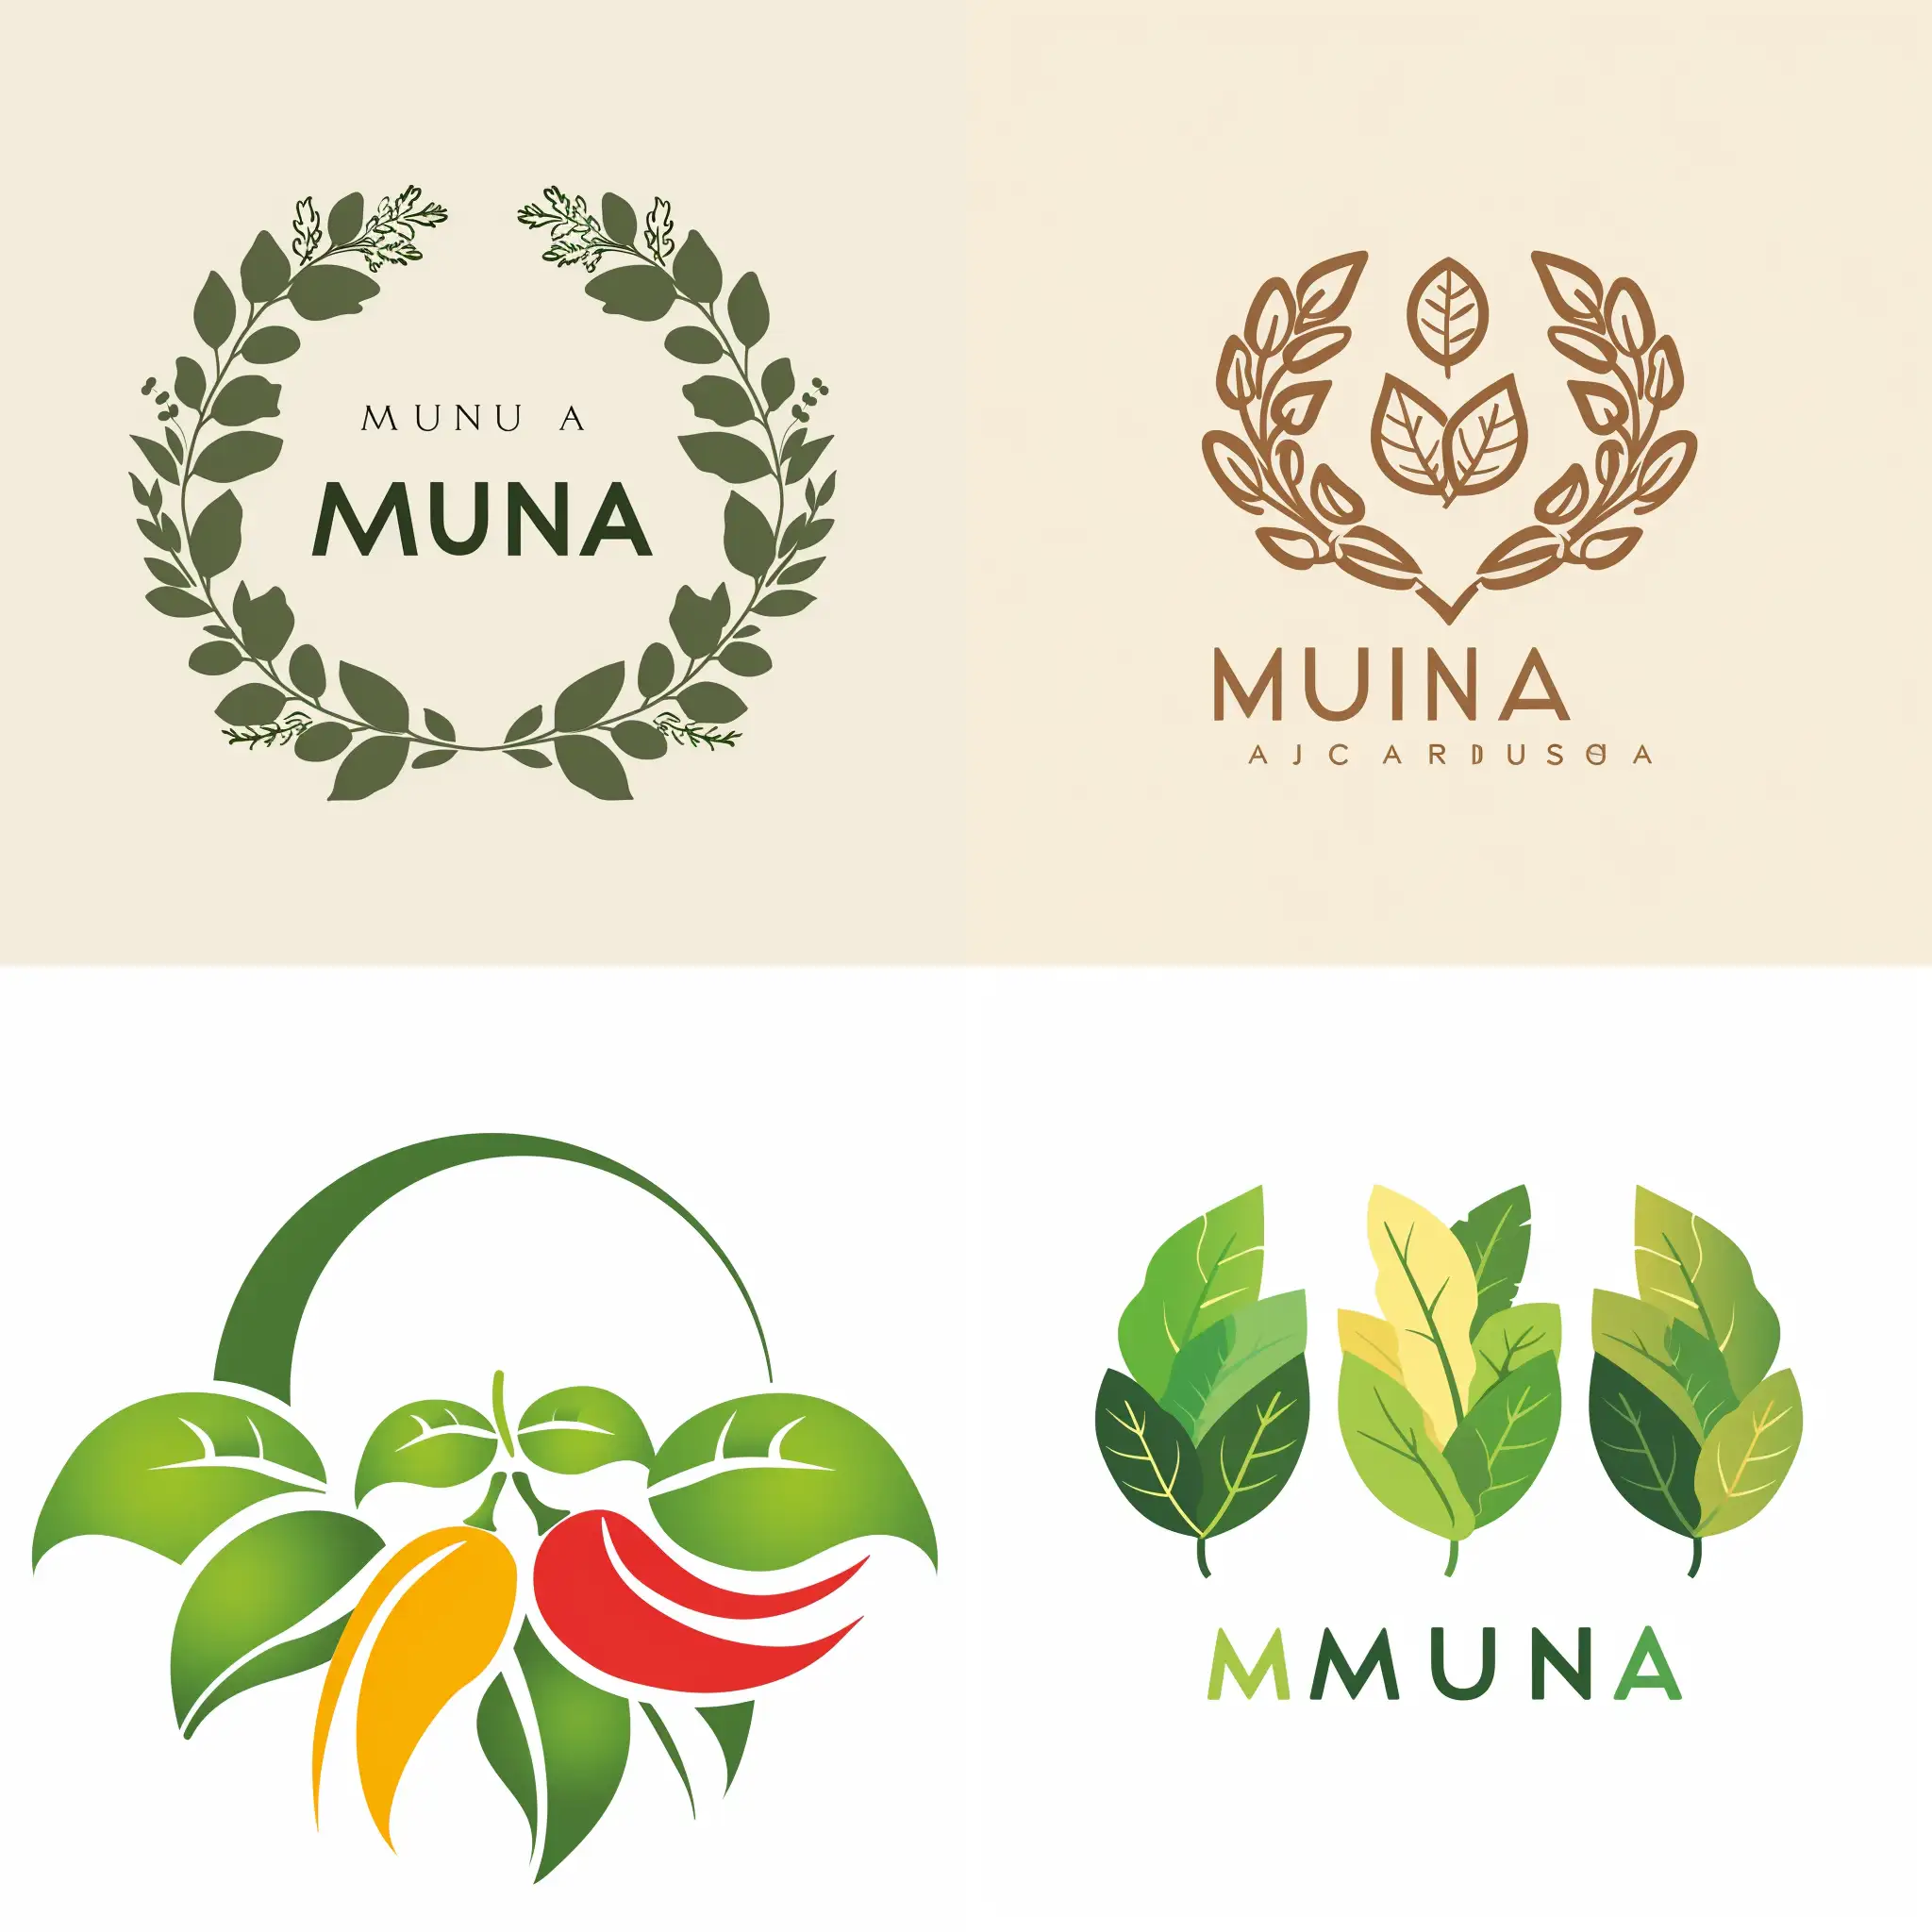 Muna logo for herbs and spices